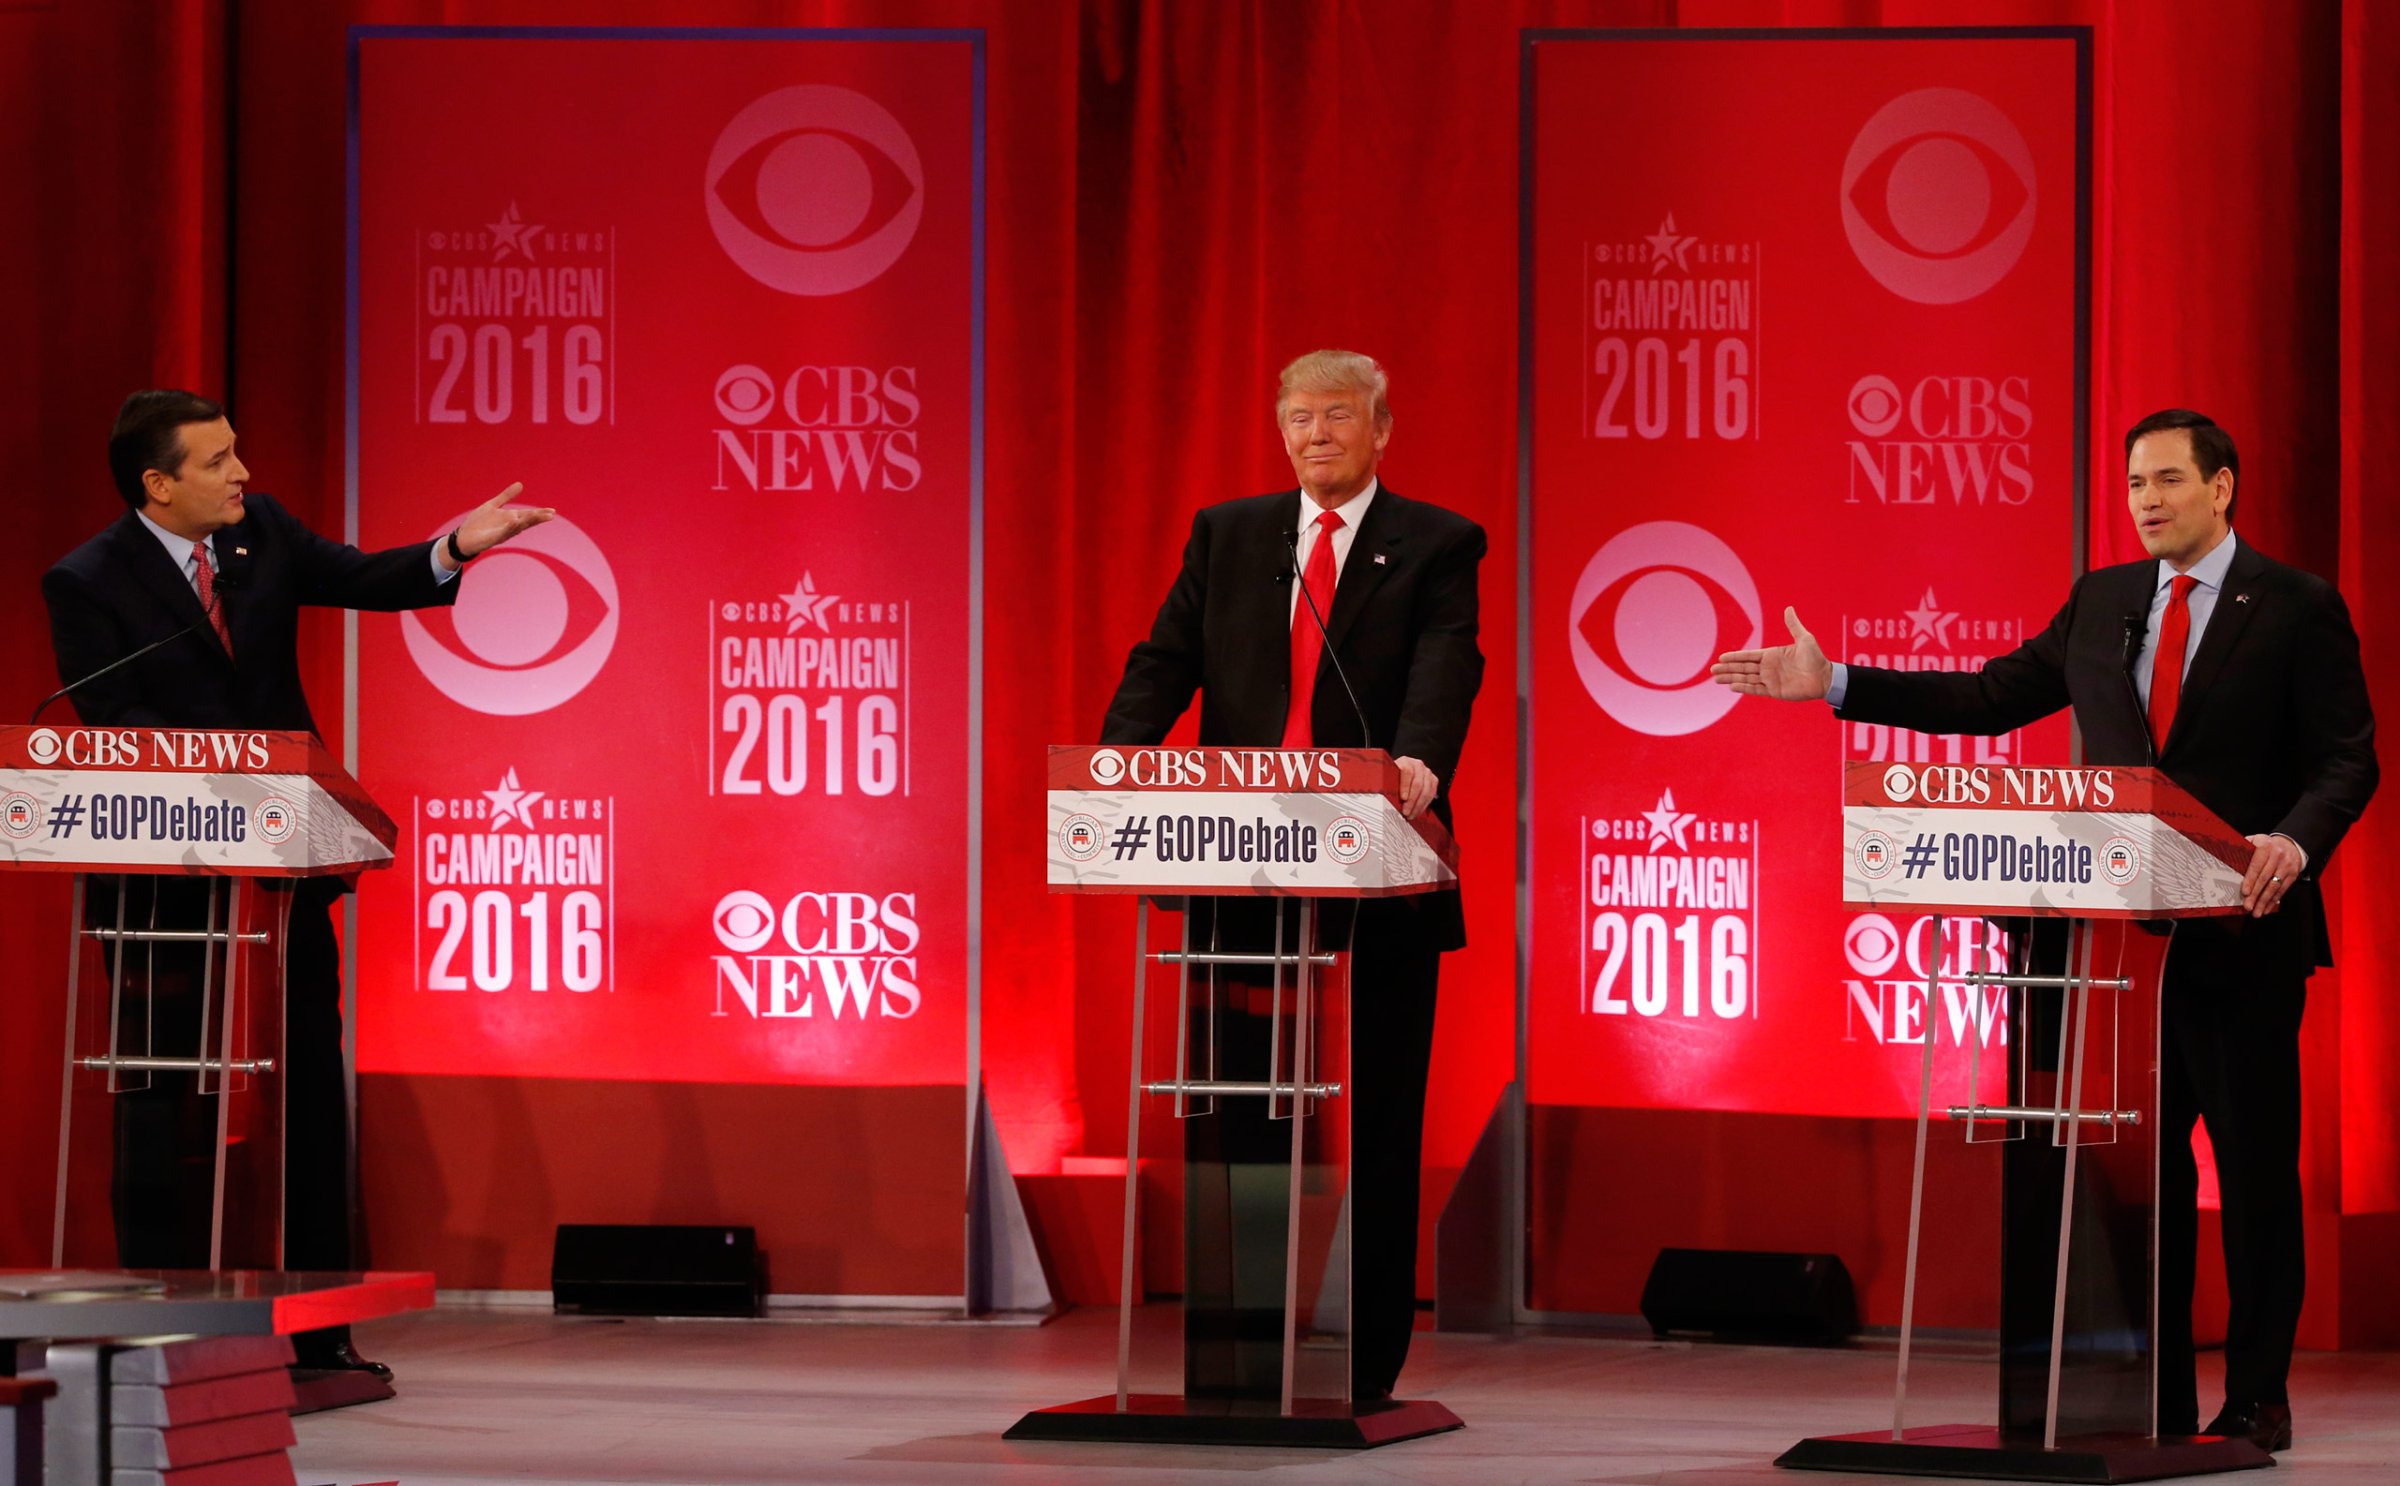 Republican U.S. presidential candidates Senator Ted Cruz (L) and Senator Marco Rubio (R) both gesture at businessman Donald Trump (C) during the Republican U.S. presidential candidates debate sponsored by CBS News and the Republican National Committee in Greenville, South Carolina February 13, 2016. REUTERS/Jonathan Ernst - RTX26TV5